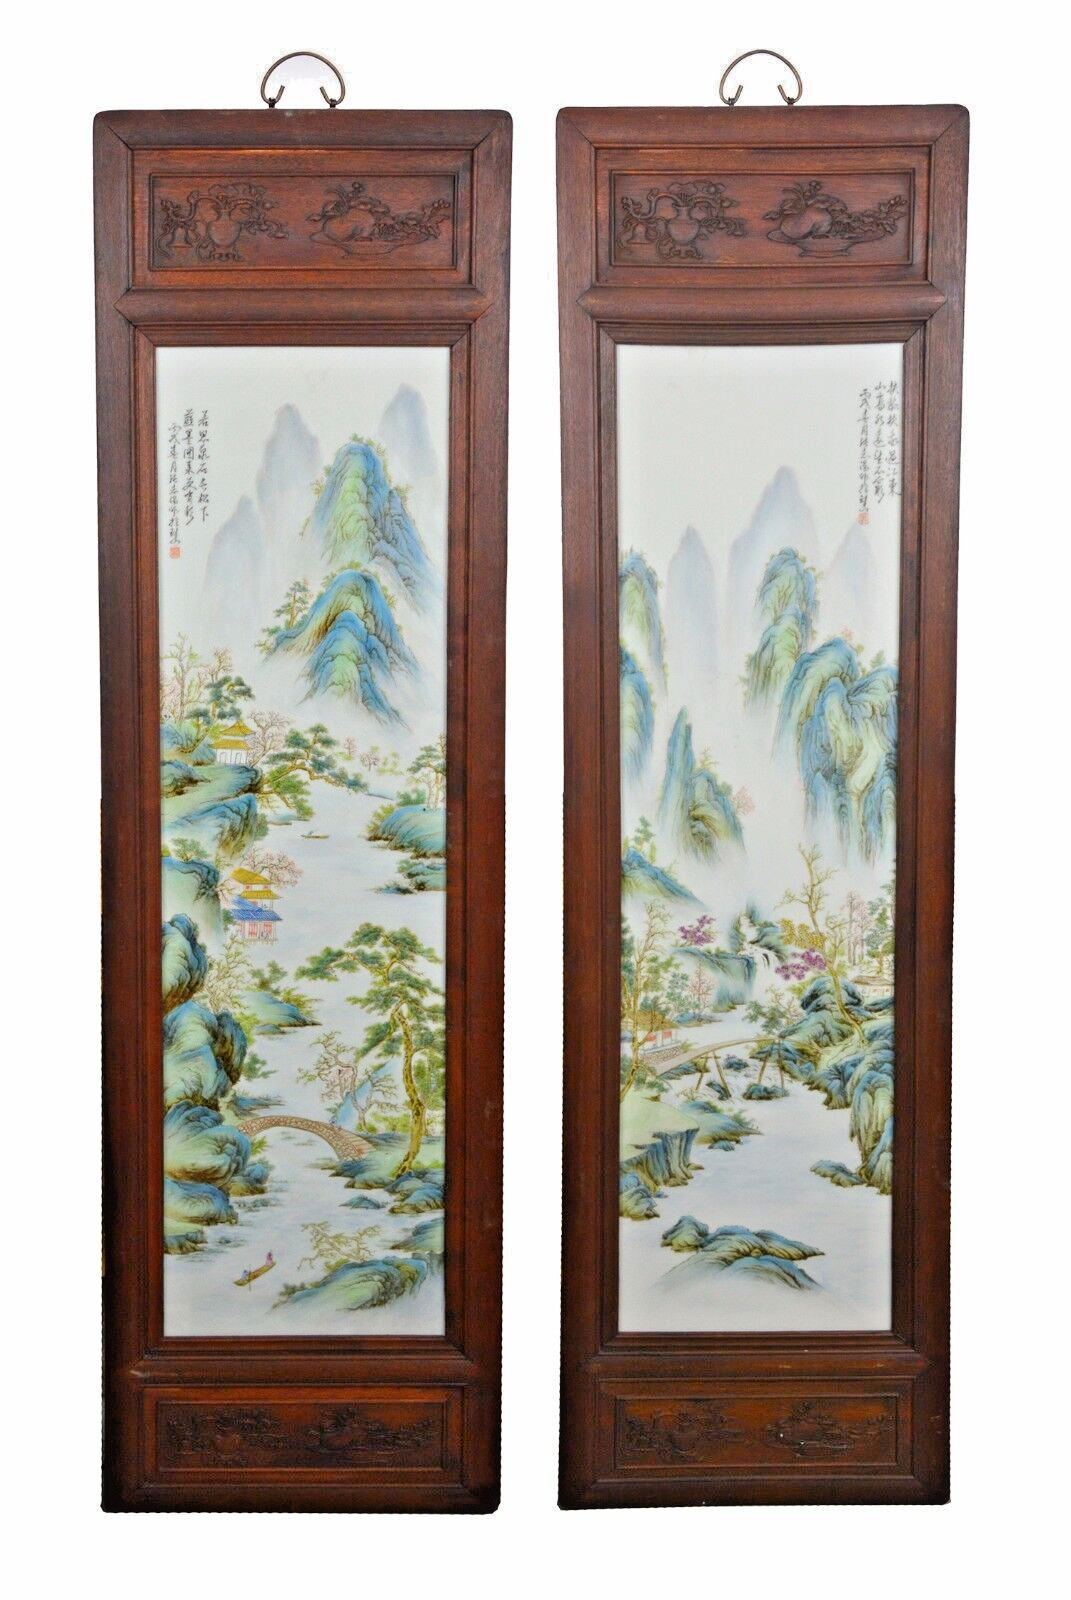 Huge Pair Chinese Early Republic Landscape Porcelain Wall Plaque - Zhang Zhitang